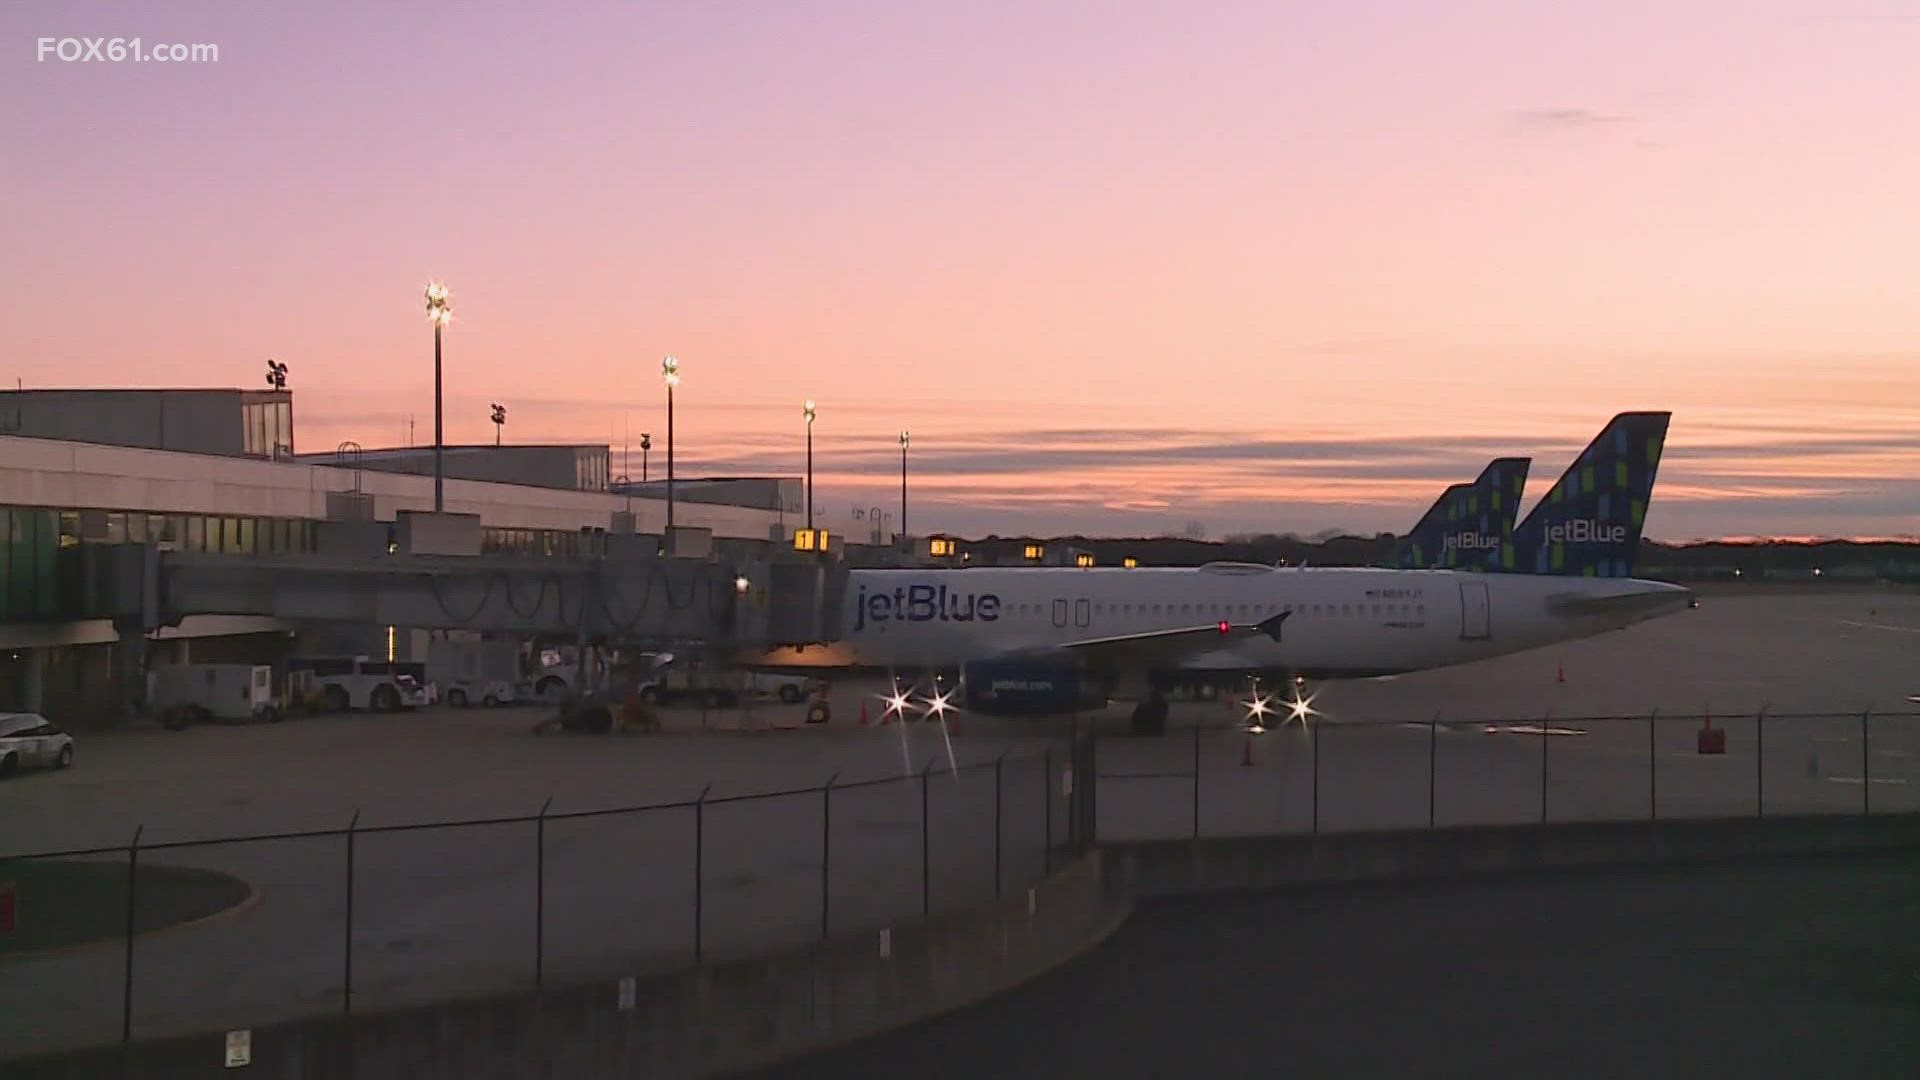 Bradley International Airport says it expects approximately 85,000 people from last weekend to Thanksgiving Day.